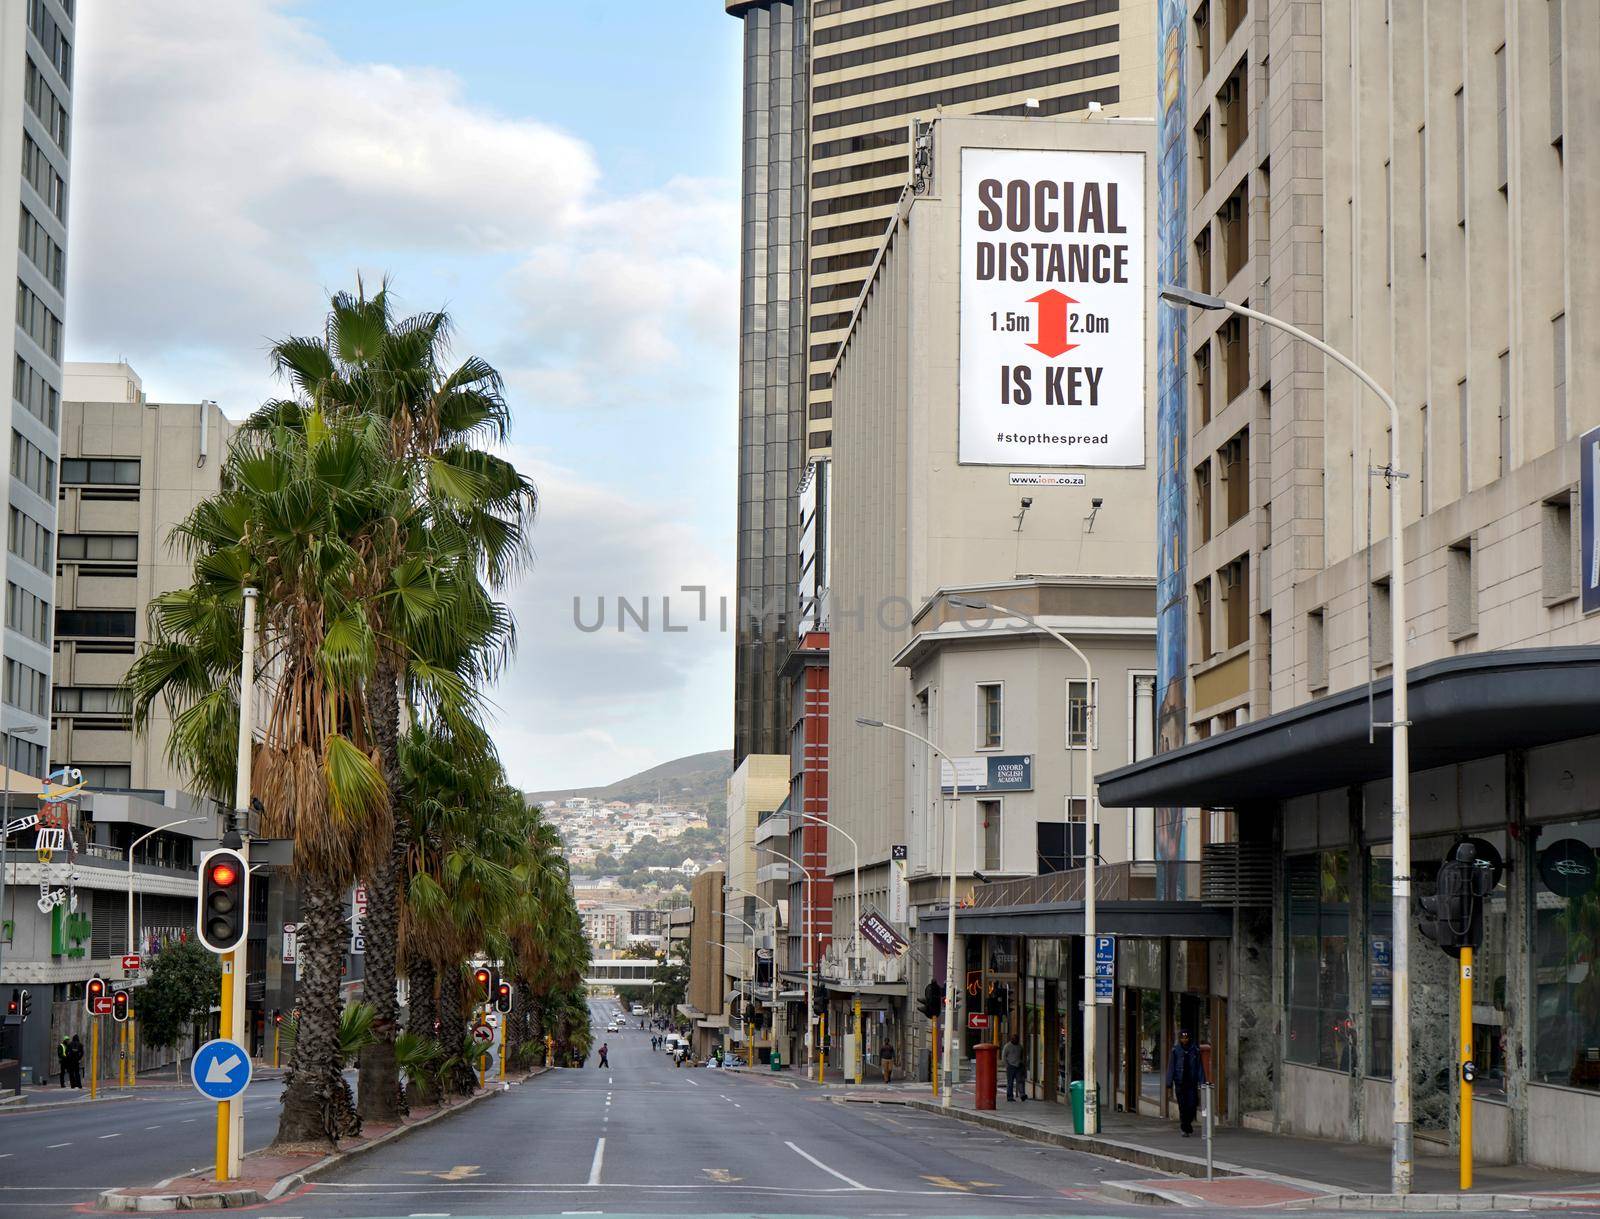 Cape Town, South Africa - 6 April 2020 : Empty streets and a social distancing sign in Cape Town during the Coronavirus lockdown